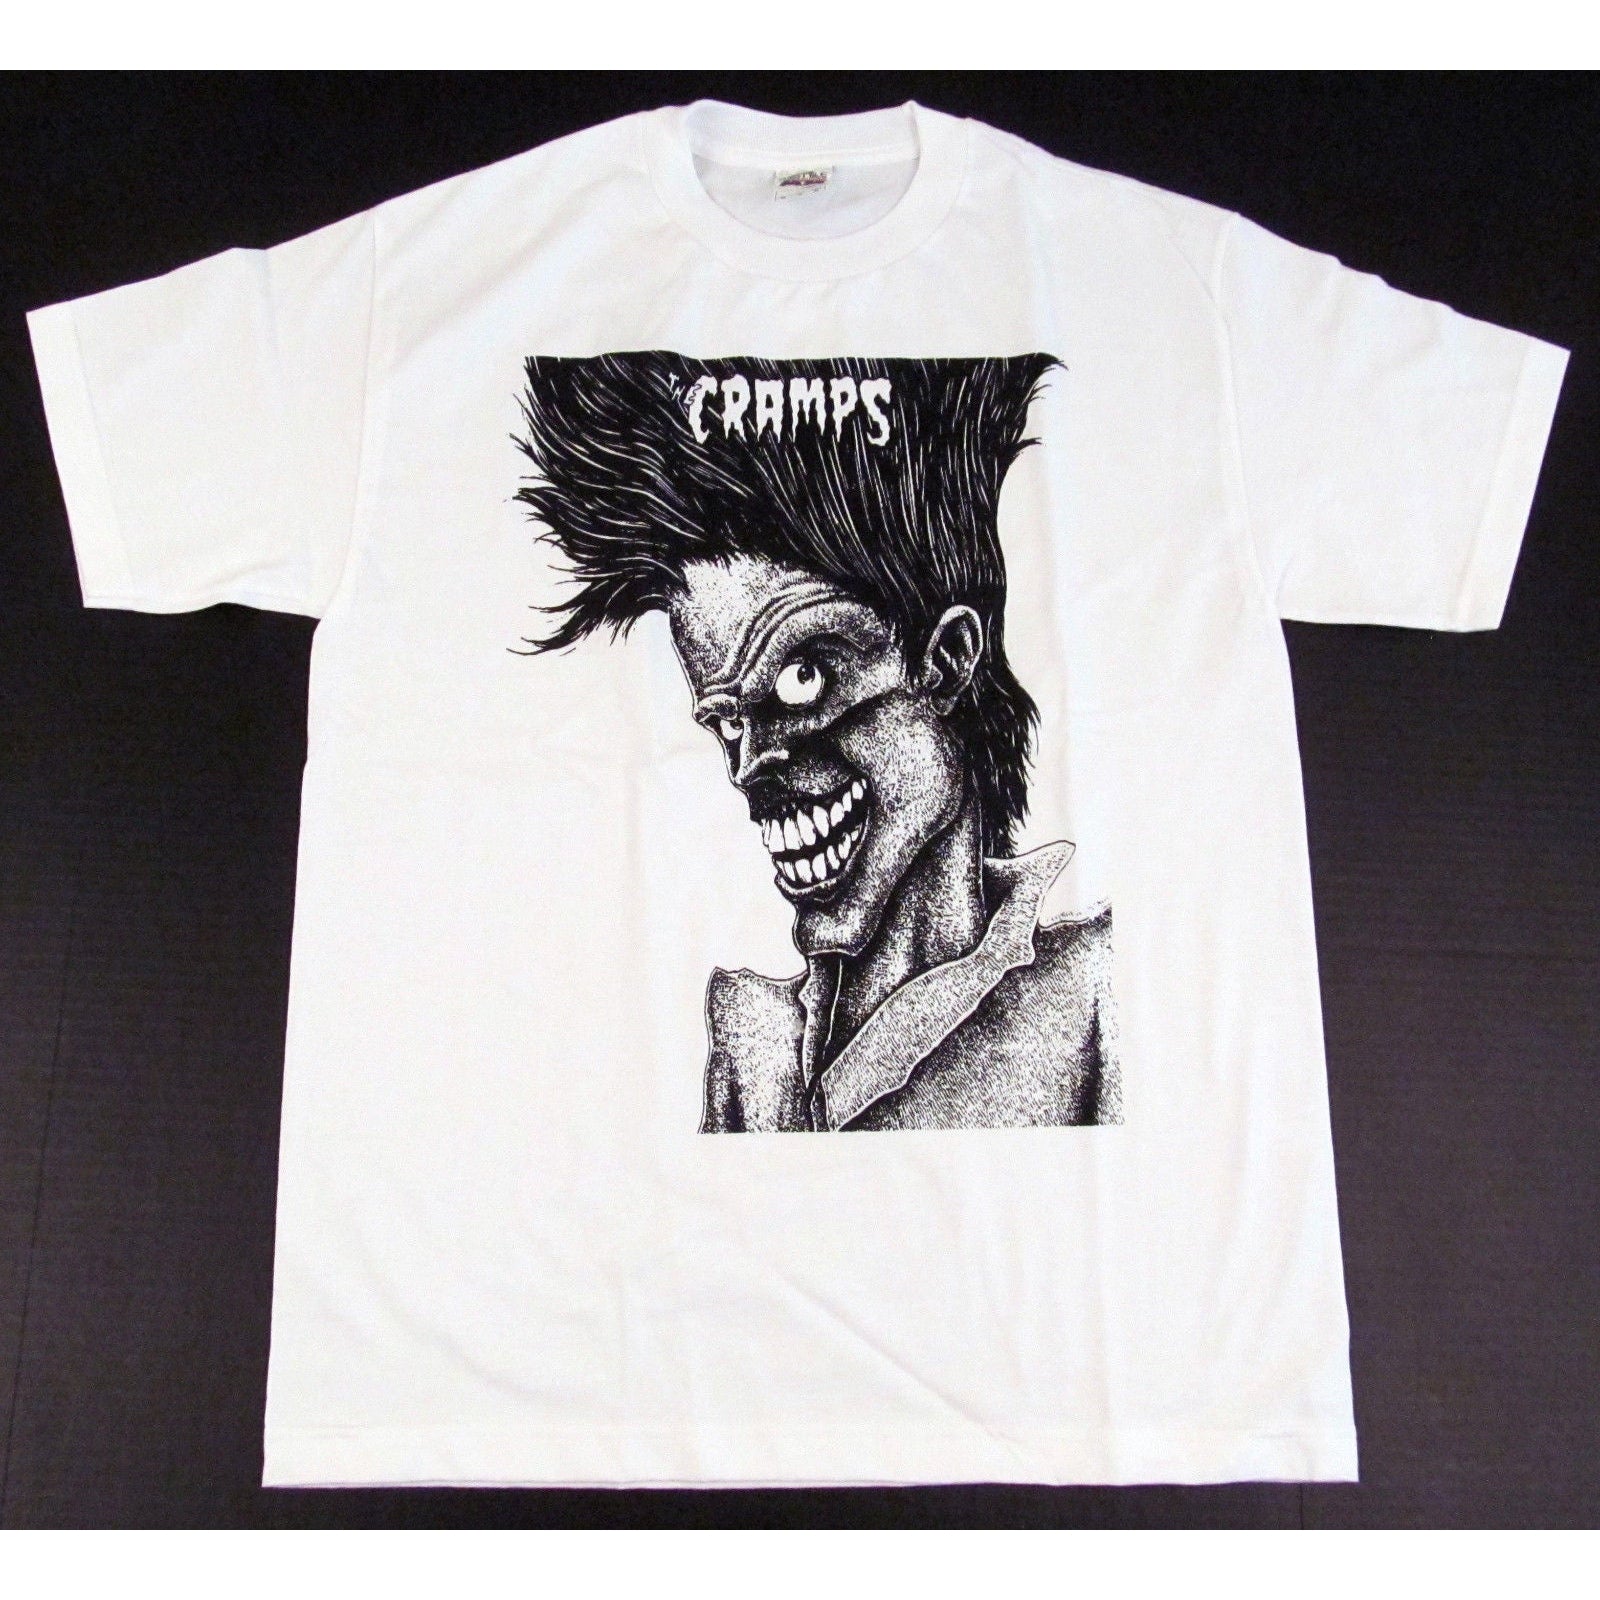 The Cramps - Bad Music T-shirt